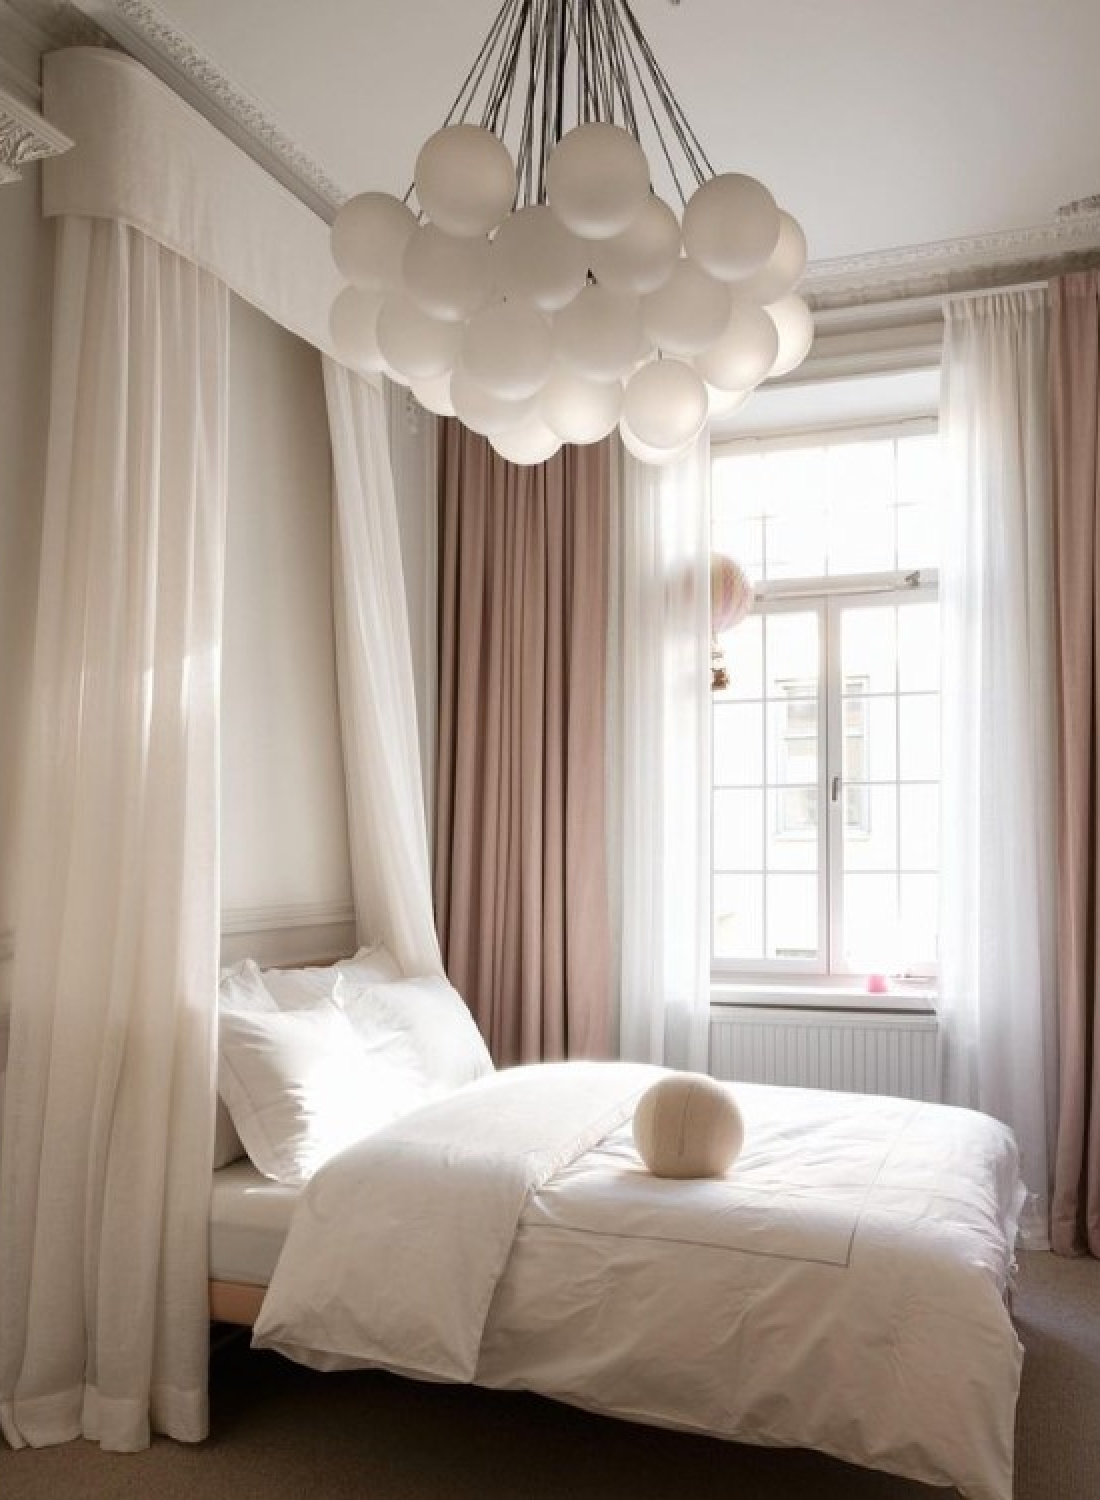 Luxurious Stockholm bedroom with canopy, blush pink drapes, and modern balloon chandelier. Design by Louis Hjorth. #stockholmapartment #luxuriousbedrooms #stockholmbedroom